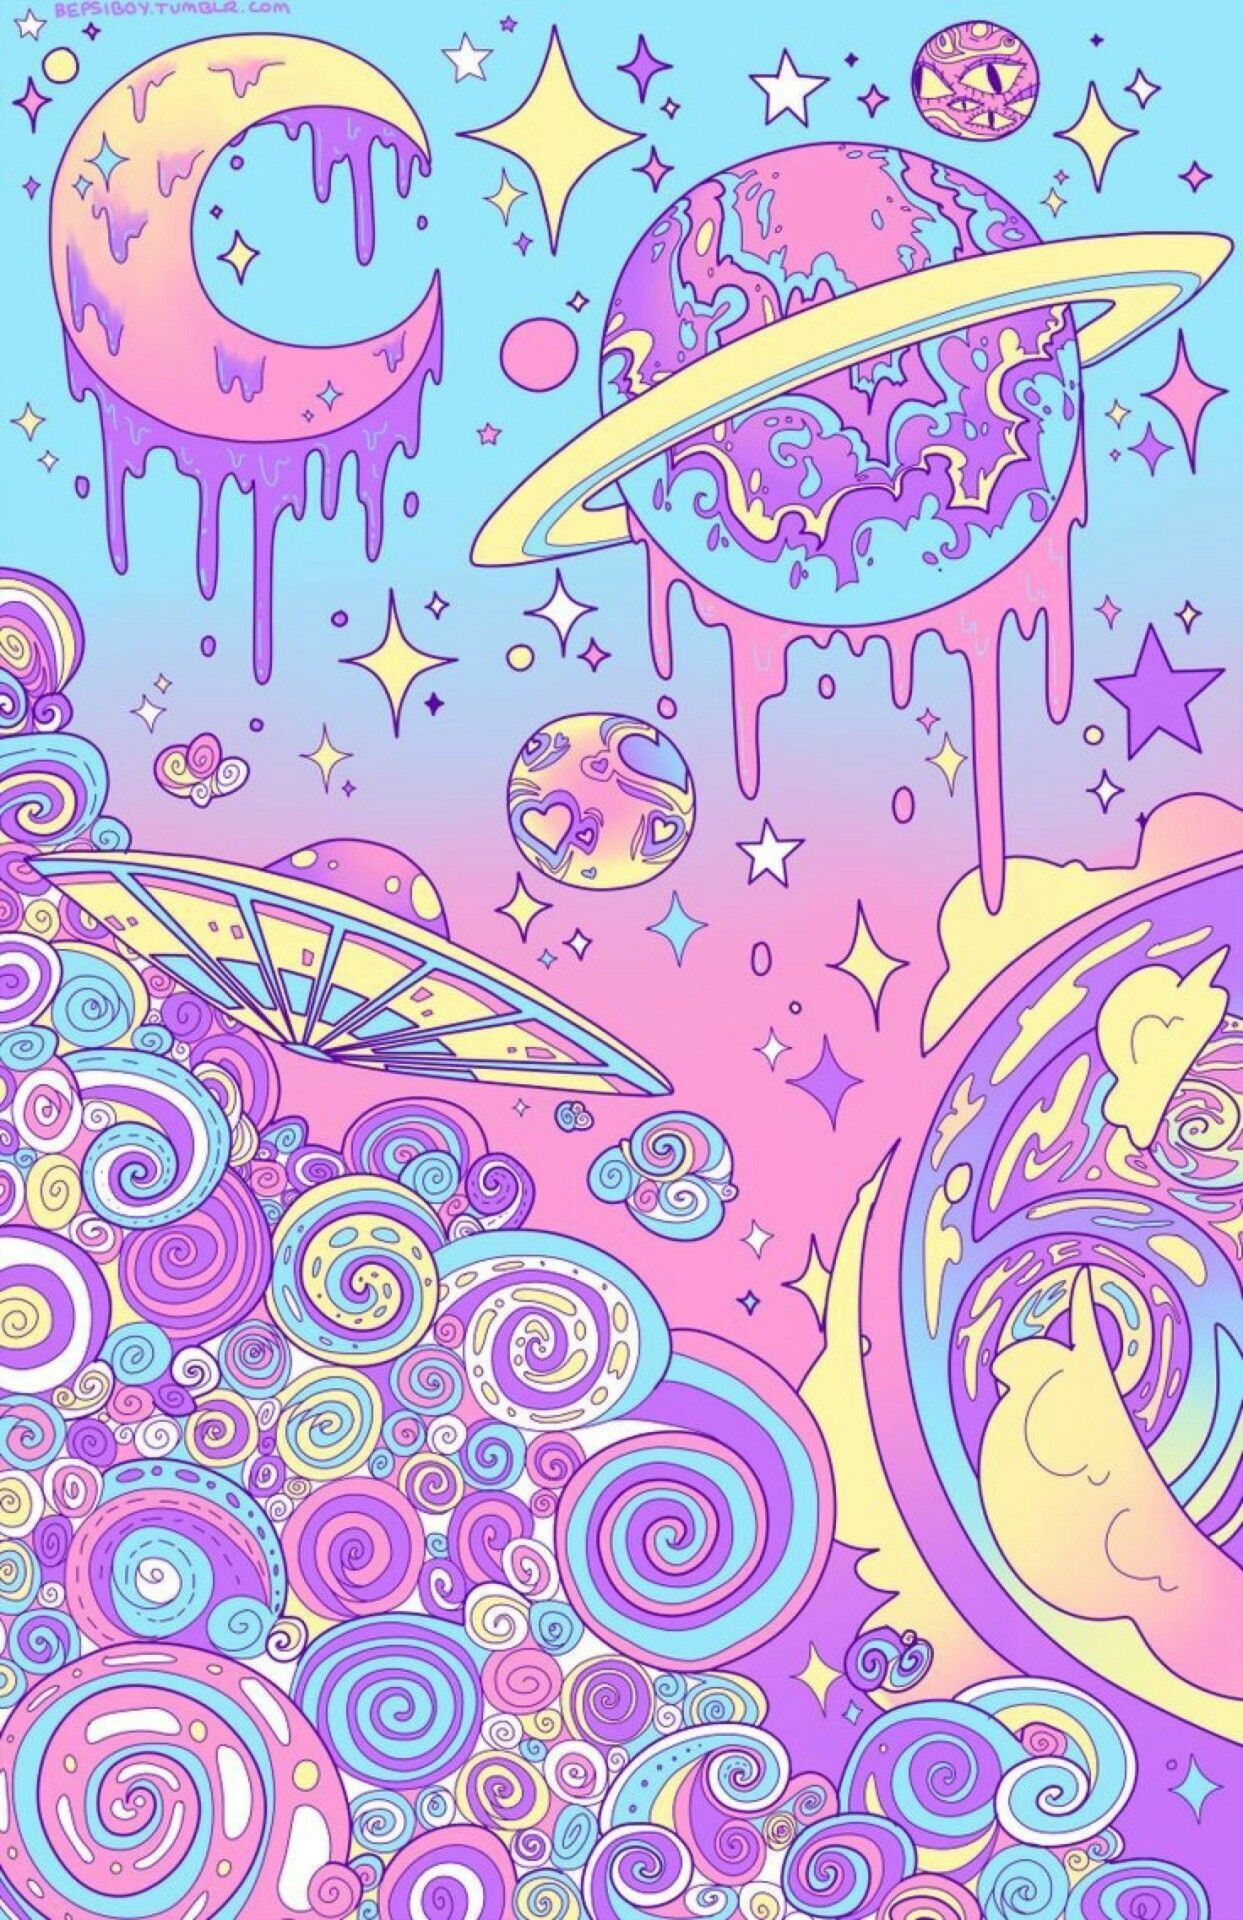 A psychedelic background with planets and stars - Planet, pastel rainbow, alien, trippy, space